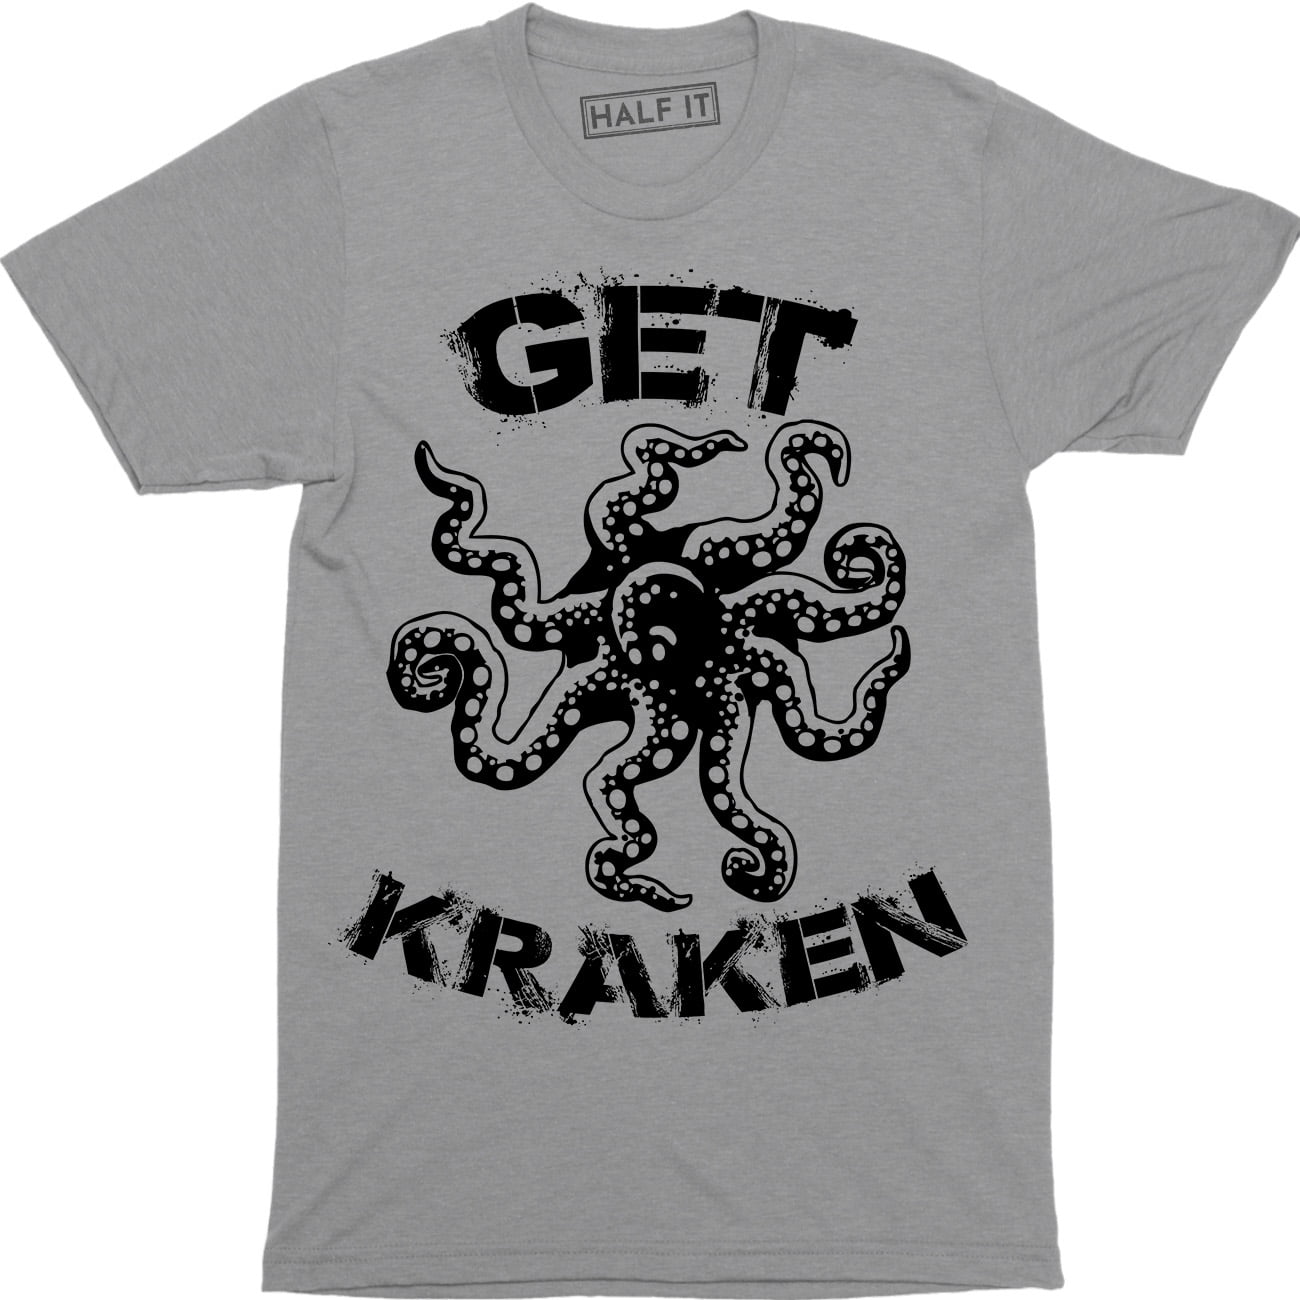  Funny Kraken Shirt : Clothing, Shoes & Jewelry